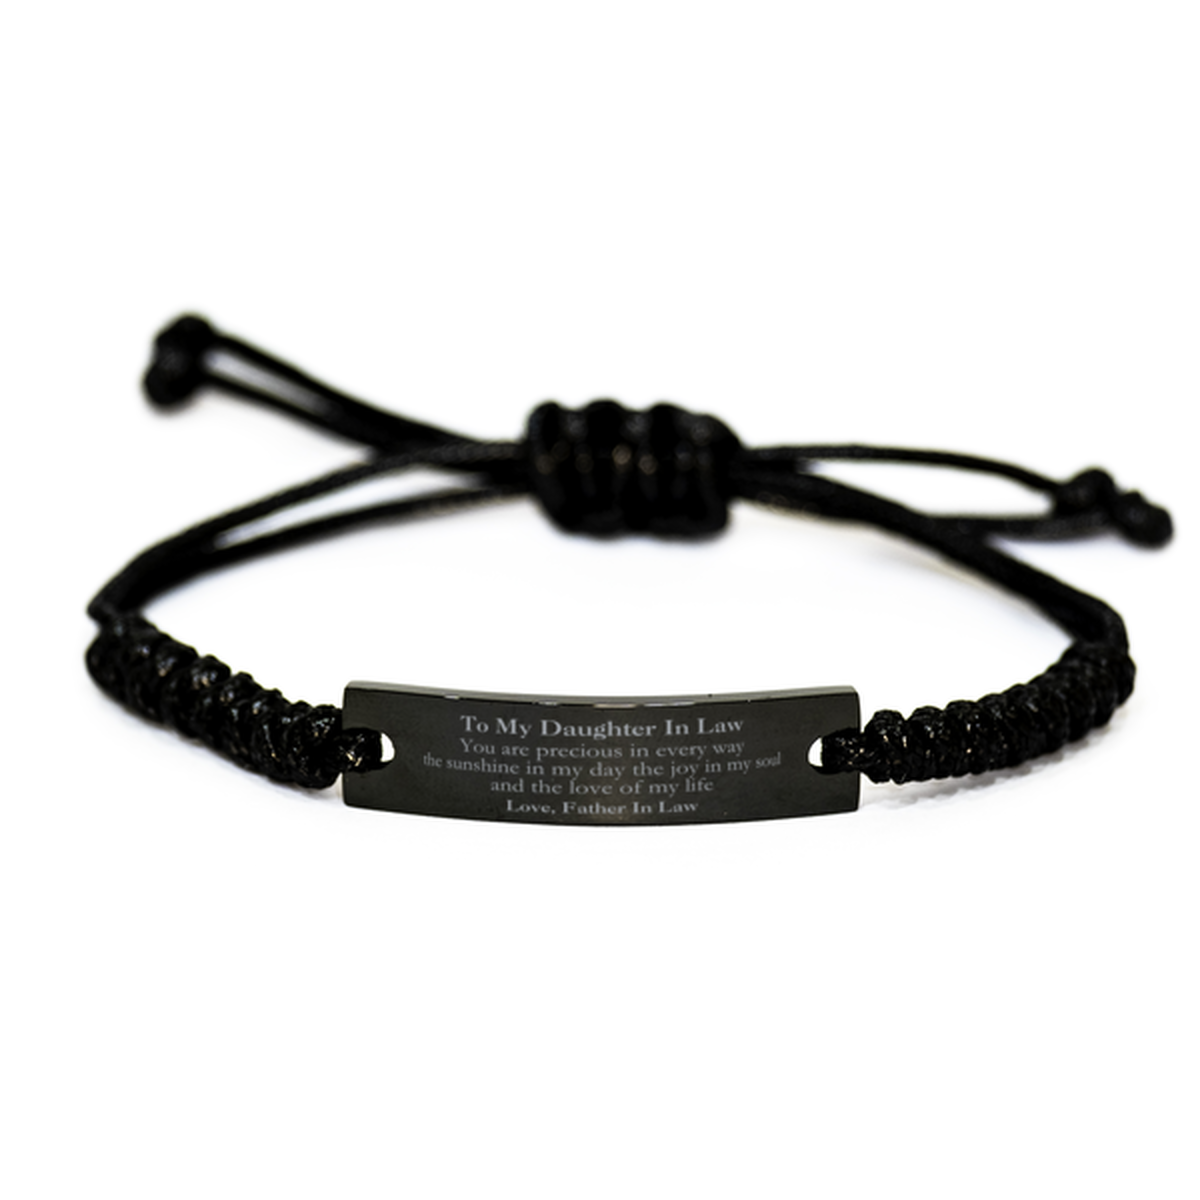 Graduation Gifts for Daughter In Law Black Rope Bracelet Present from Father In Law, Christmas Daughter In Law Birthday Gifts Daughter In Law You are precious in every way the sunshine in my day. Love, Father In Law